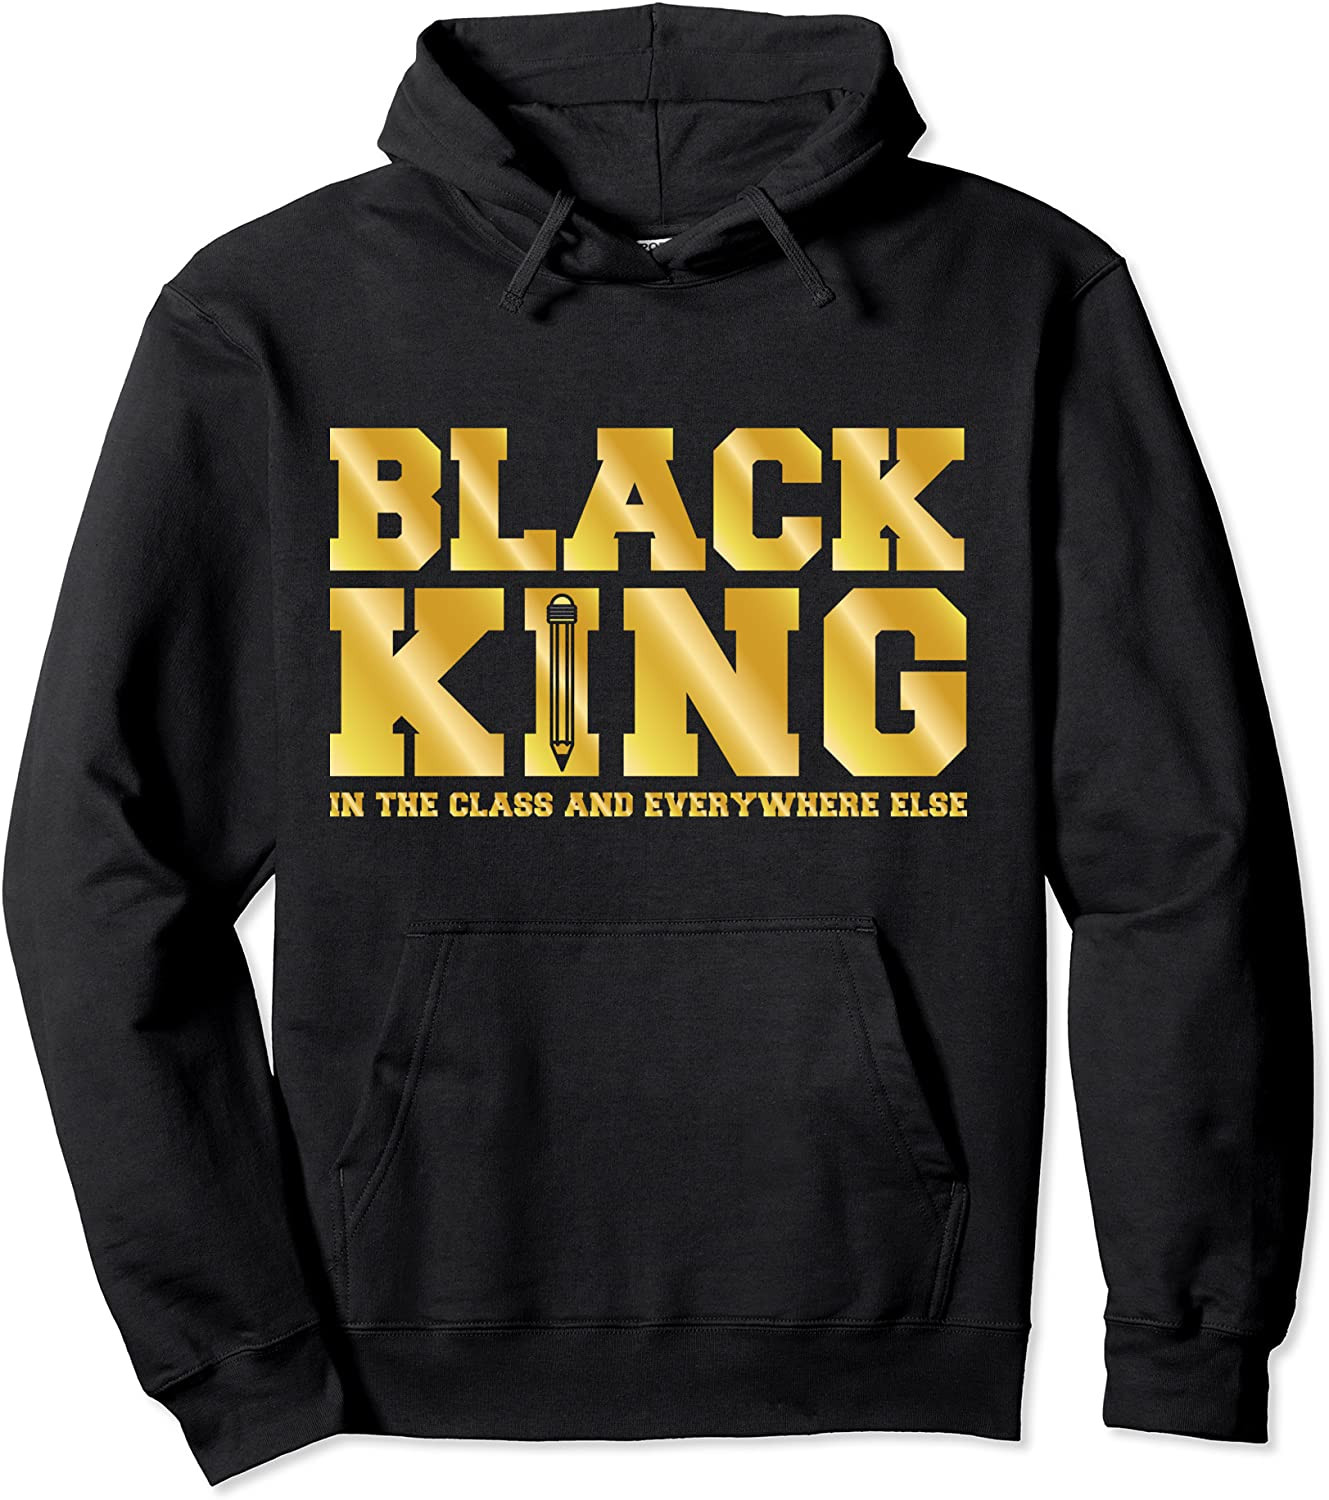 Black King Class & Everywhere Cool Black History Month Gift Pullover Hoodie